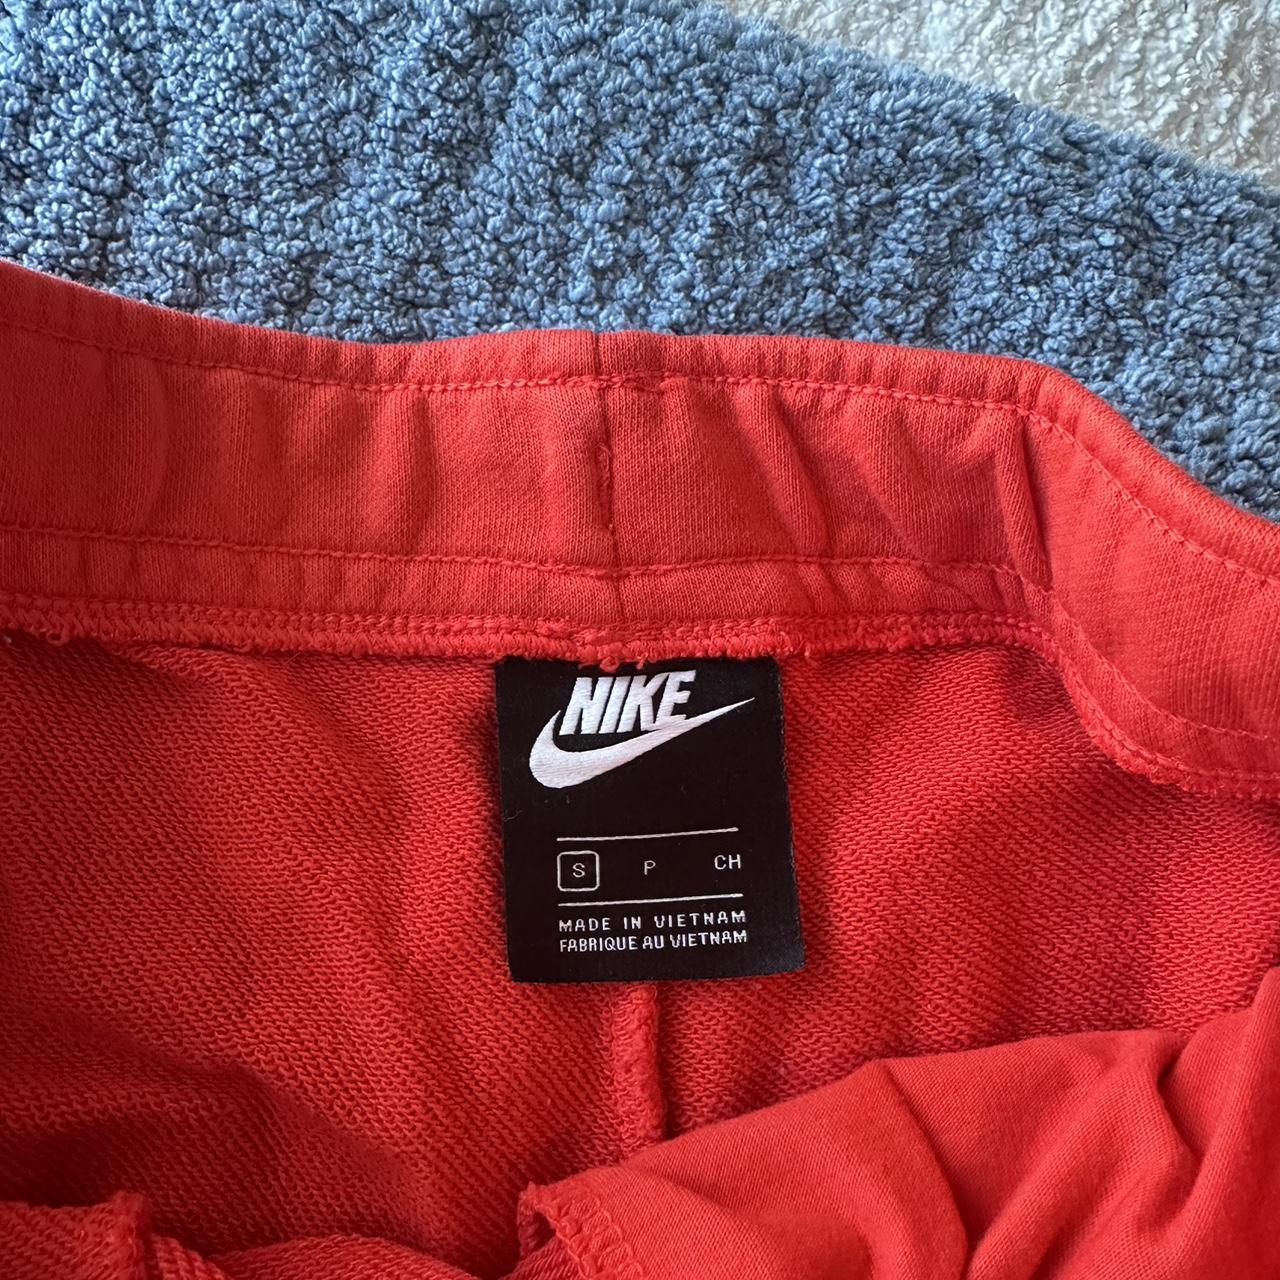 Nike red fleece shorts. Size small! Barely worn,... - Depop